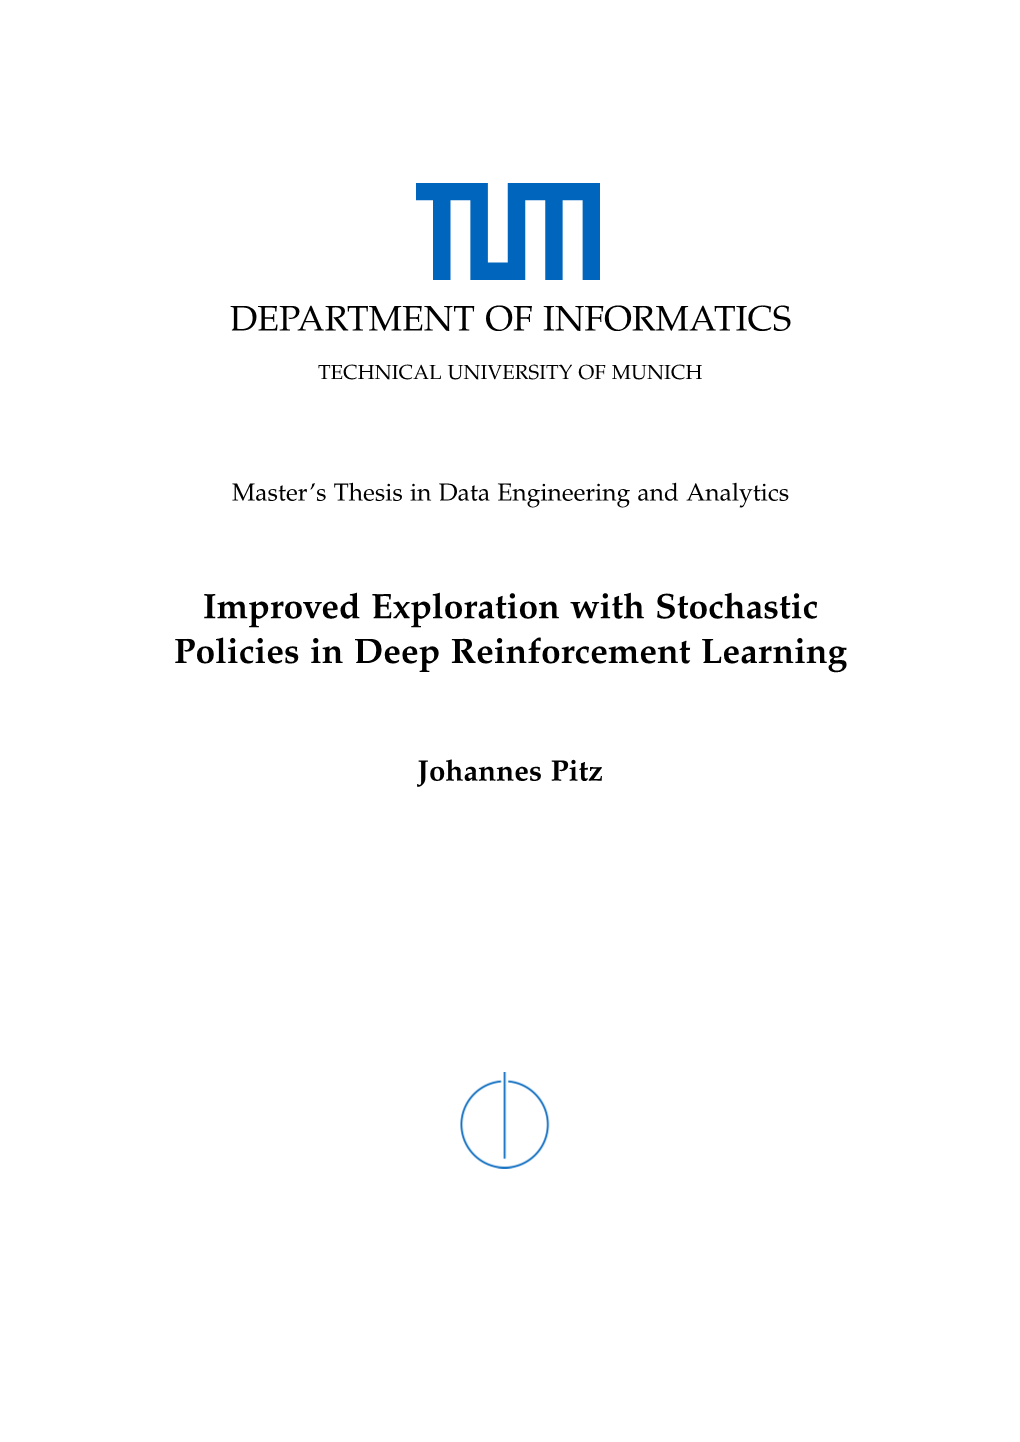 DEPARTMENT of INFORMATICS Improved Exploration With